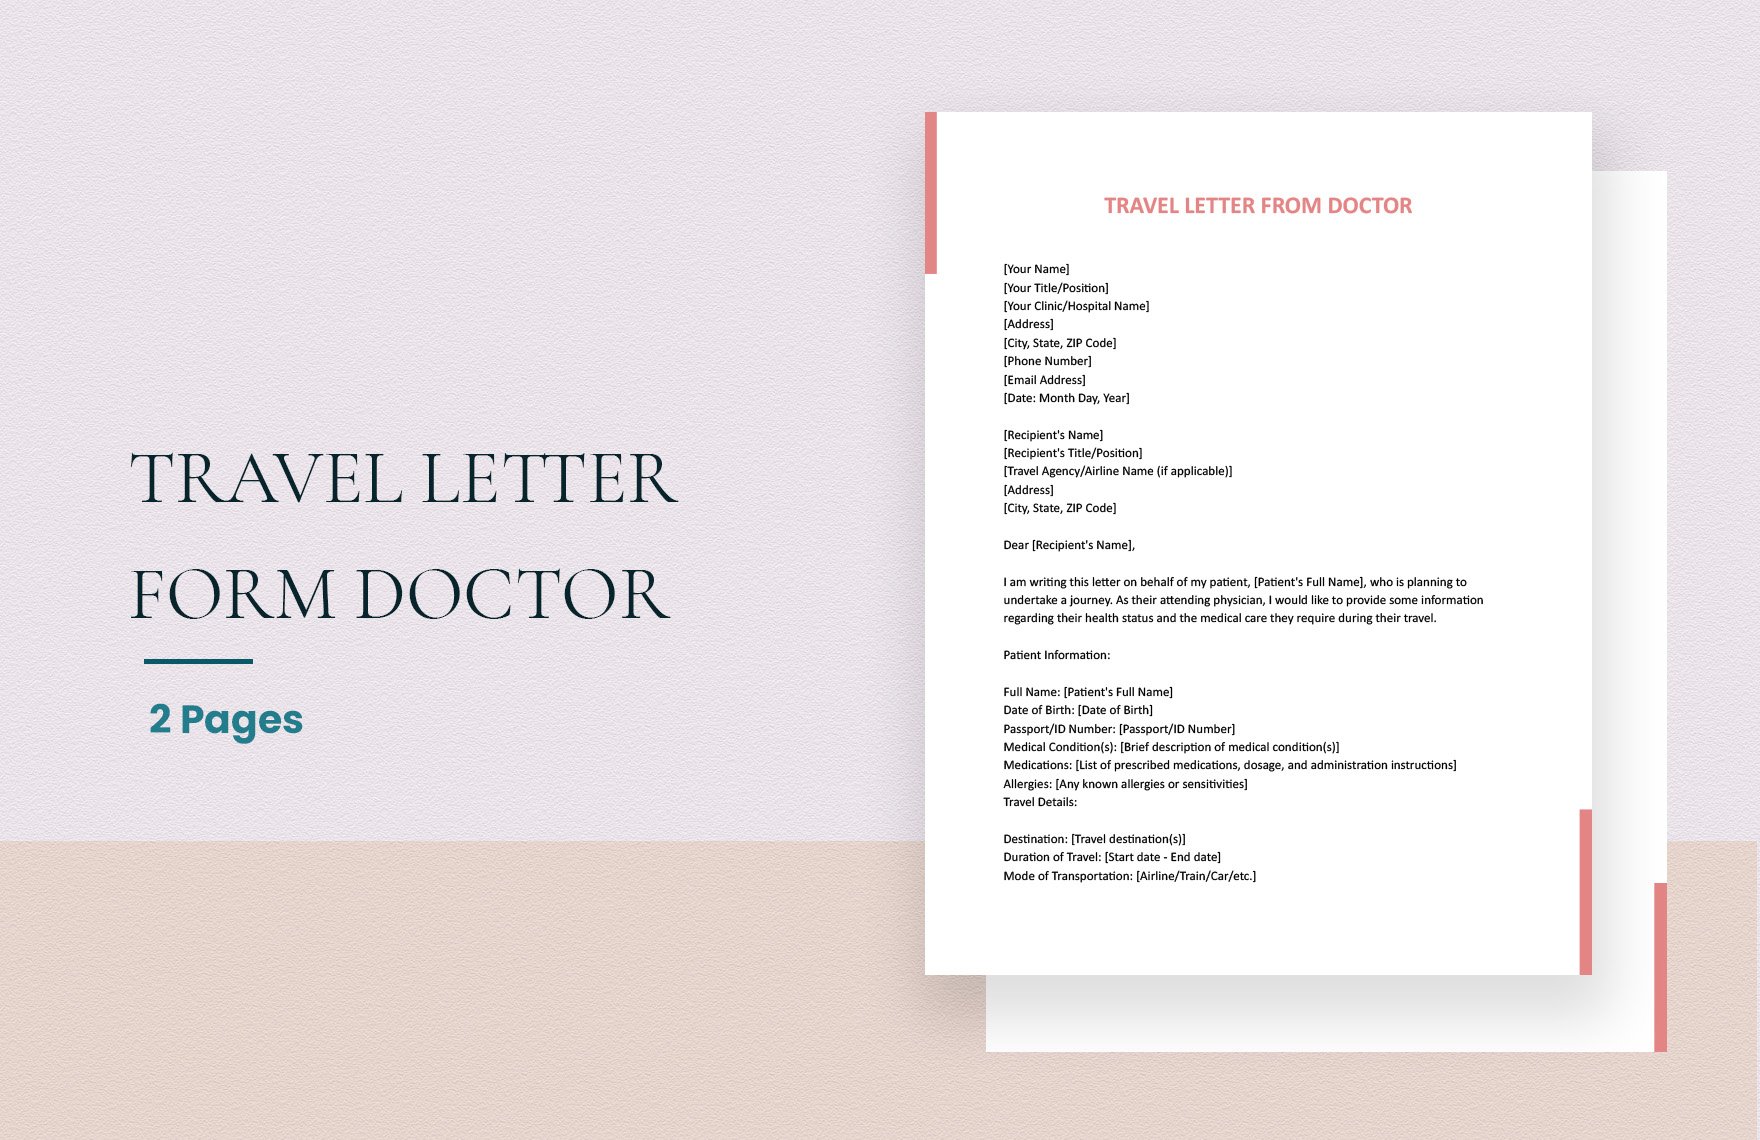 Travel Letter From Doctor in Word, Google Docs, Apple Pages